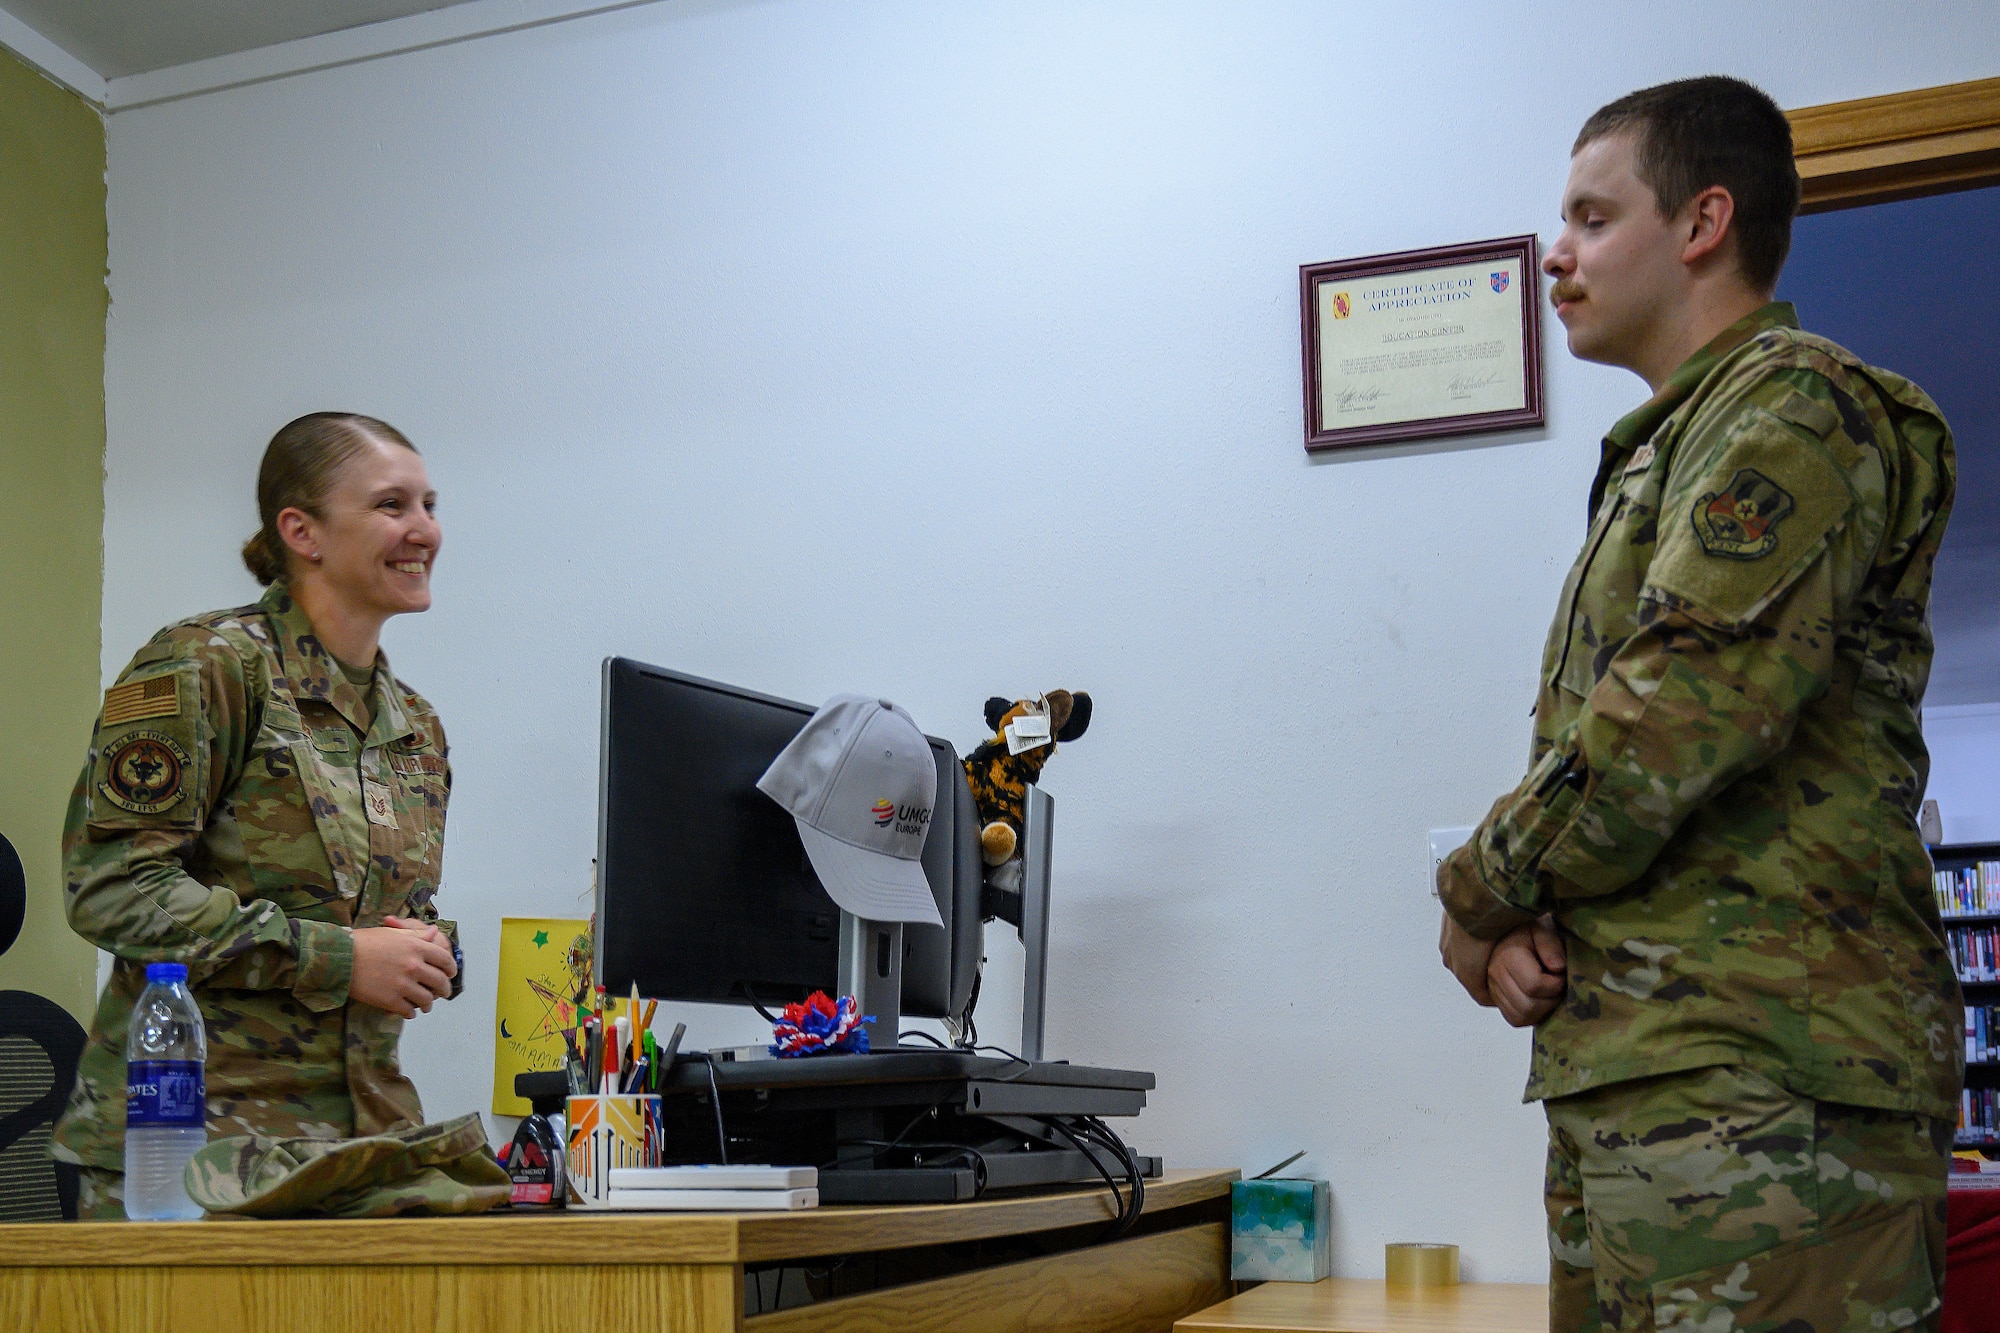 Airman provides educational counsel to another airman